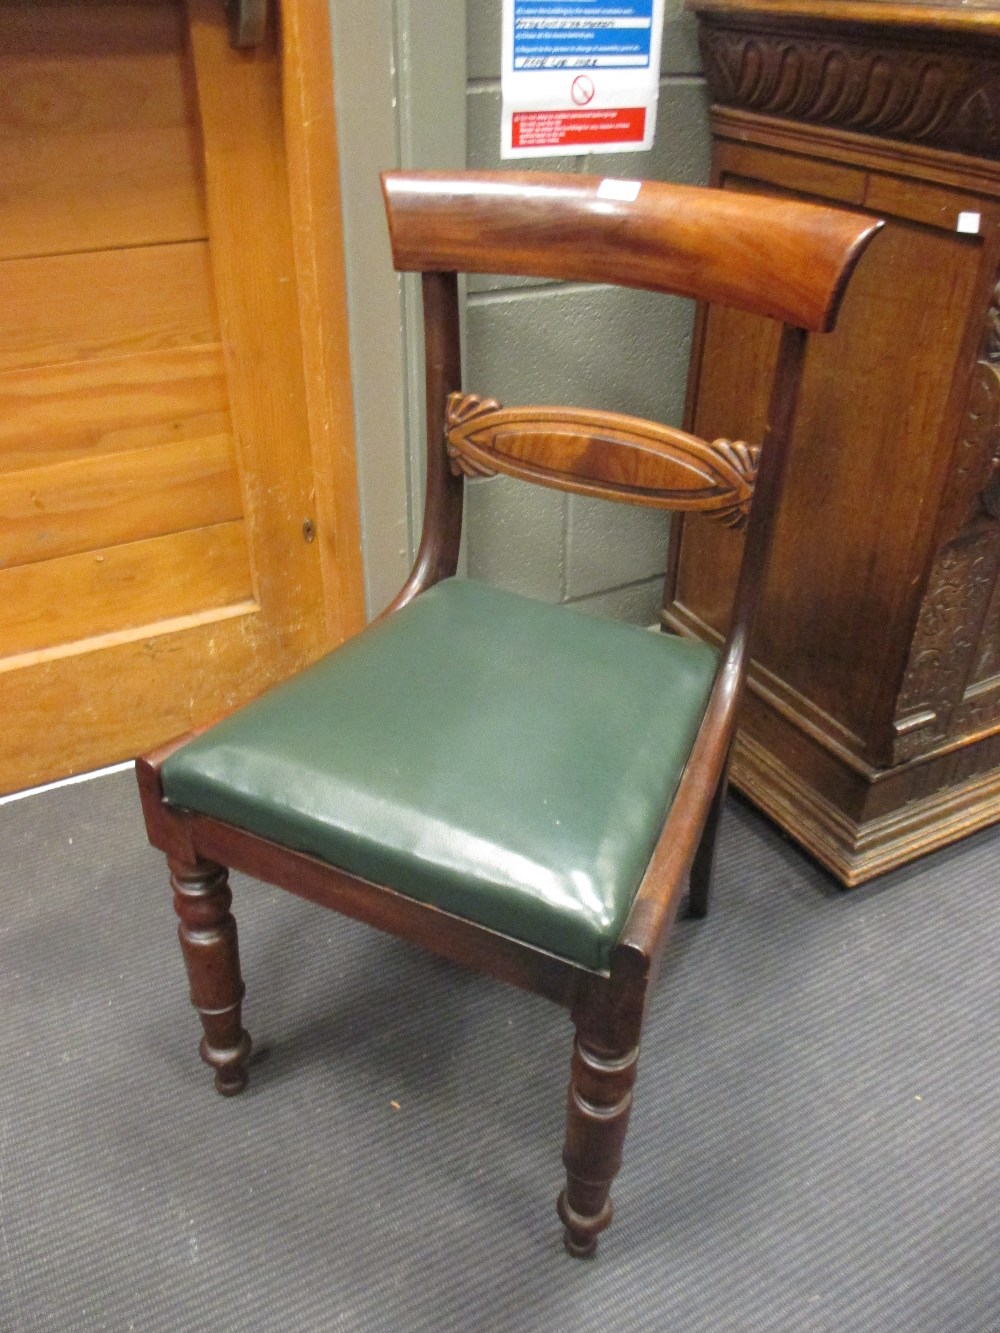 A Regency style mahogany chair open turned legs with drop-in seat